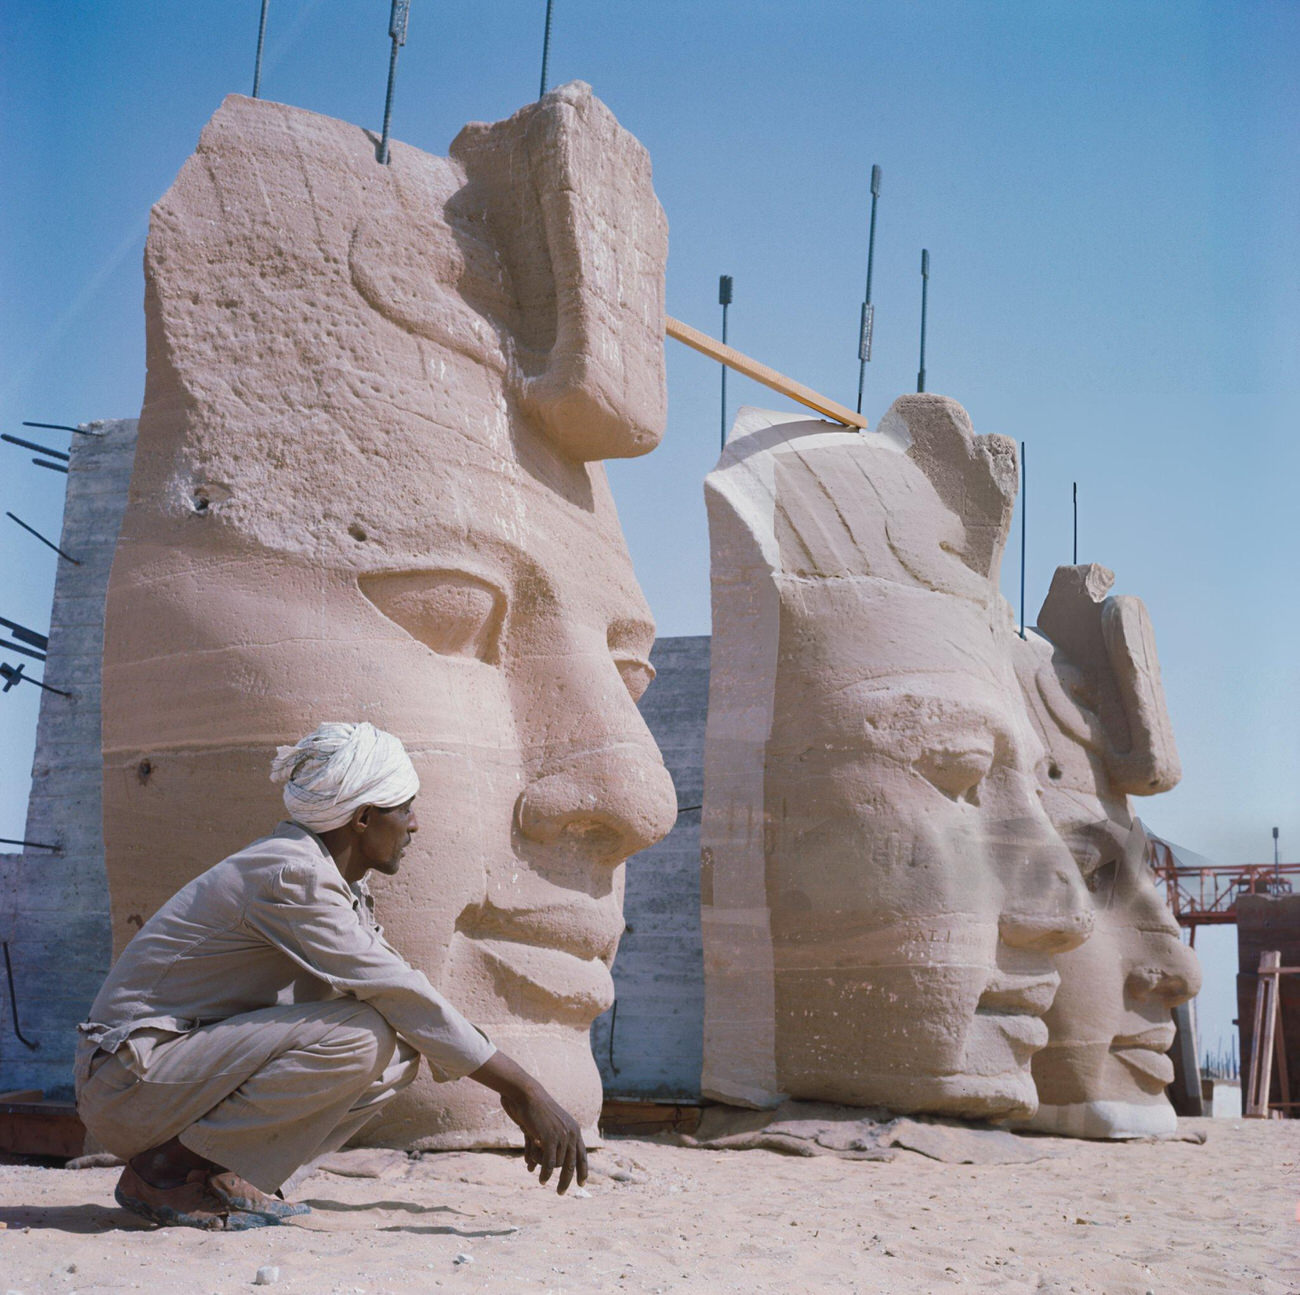 Stone heads of Pharaoh Ramesses II's statues at Abu Simbel being disassembled in 1964 for relocation due to Nile flooding from the Aswan High Dam.